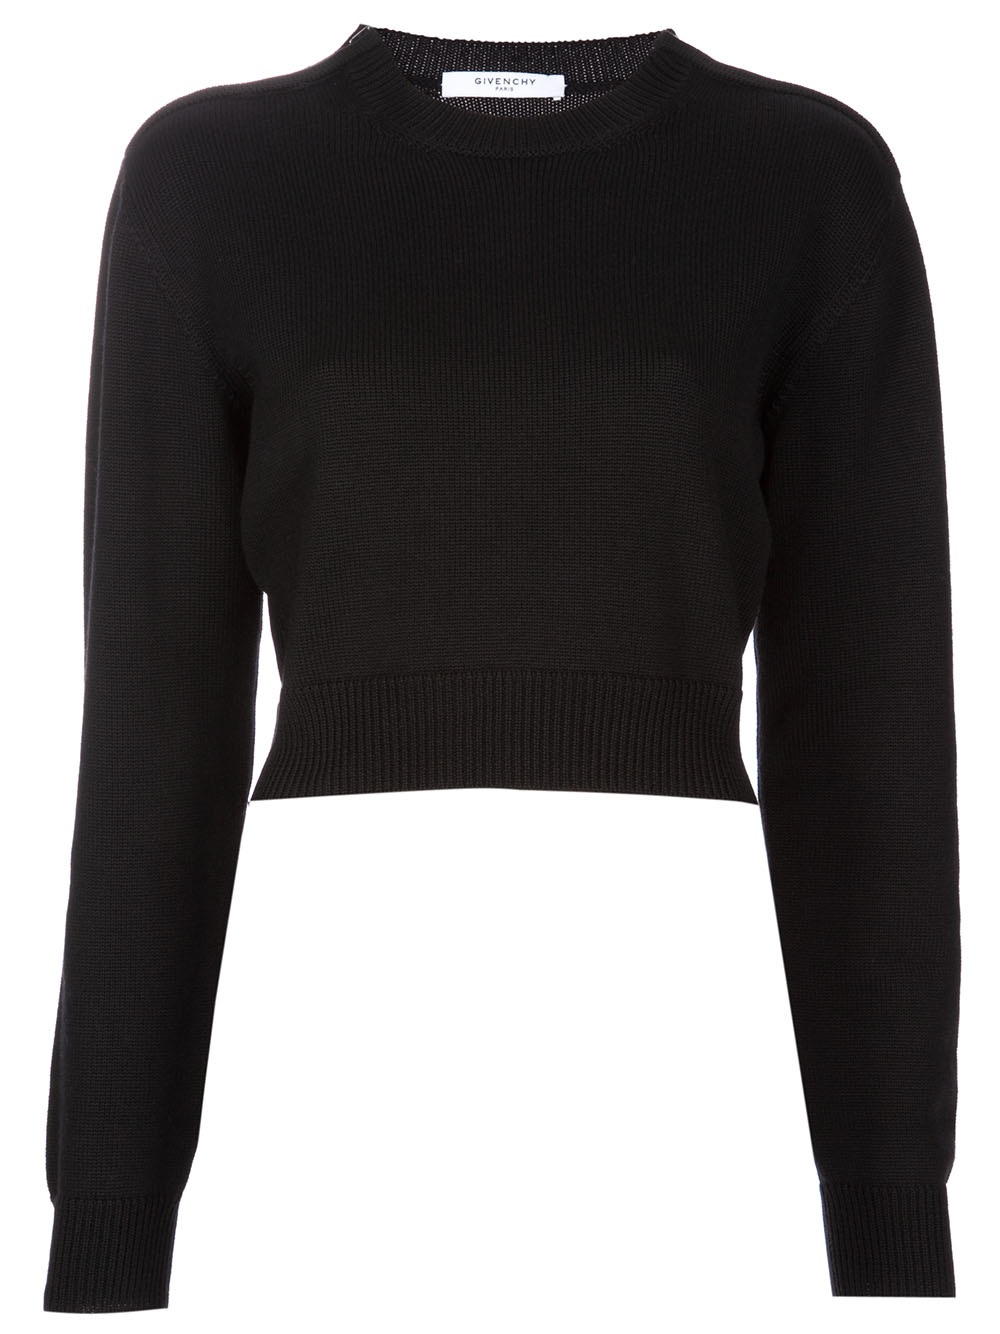 Givenchy Cropped Sweater in Black | Lyst